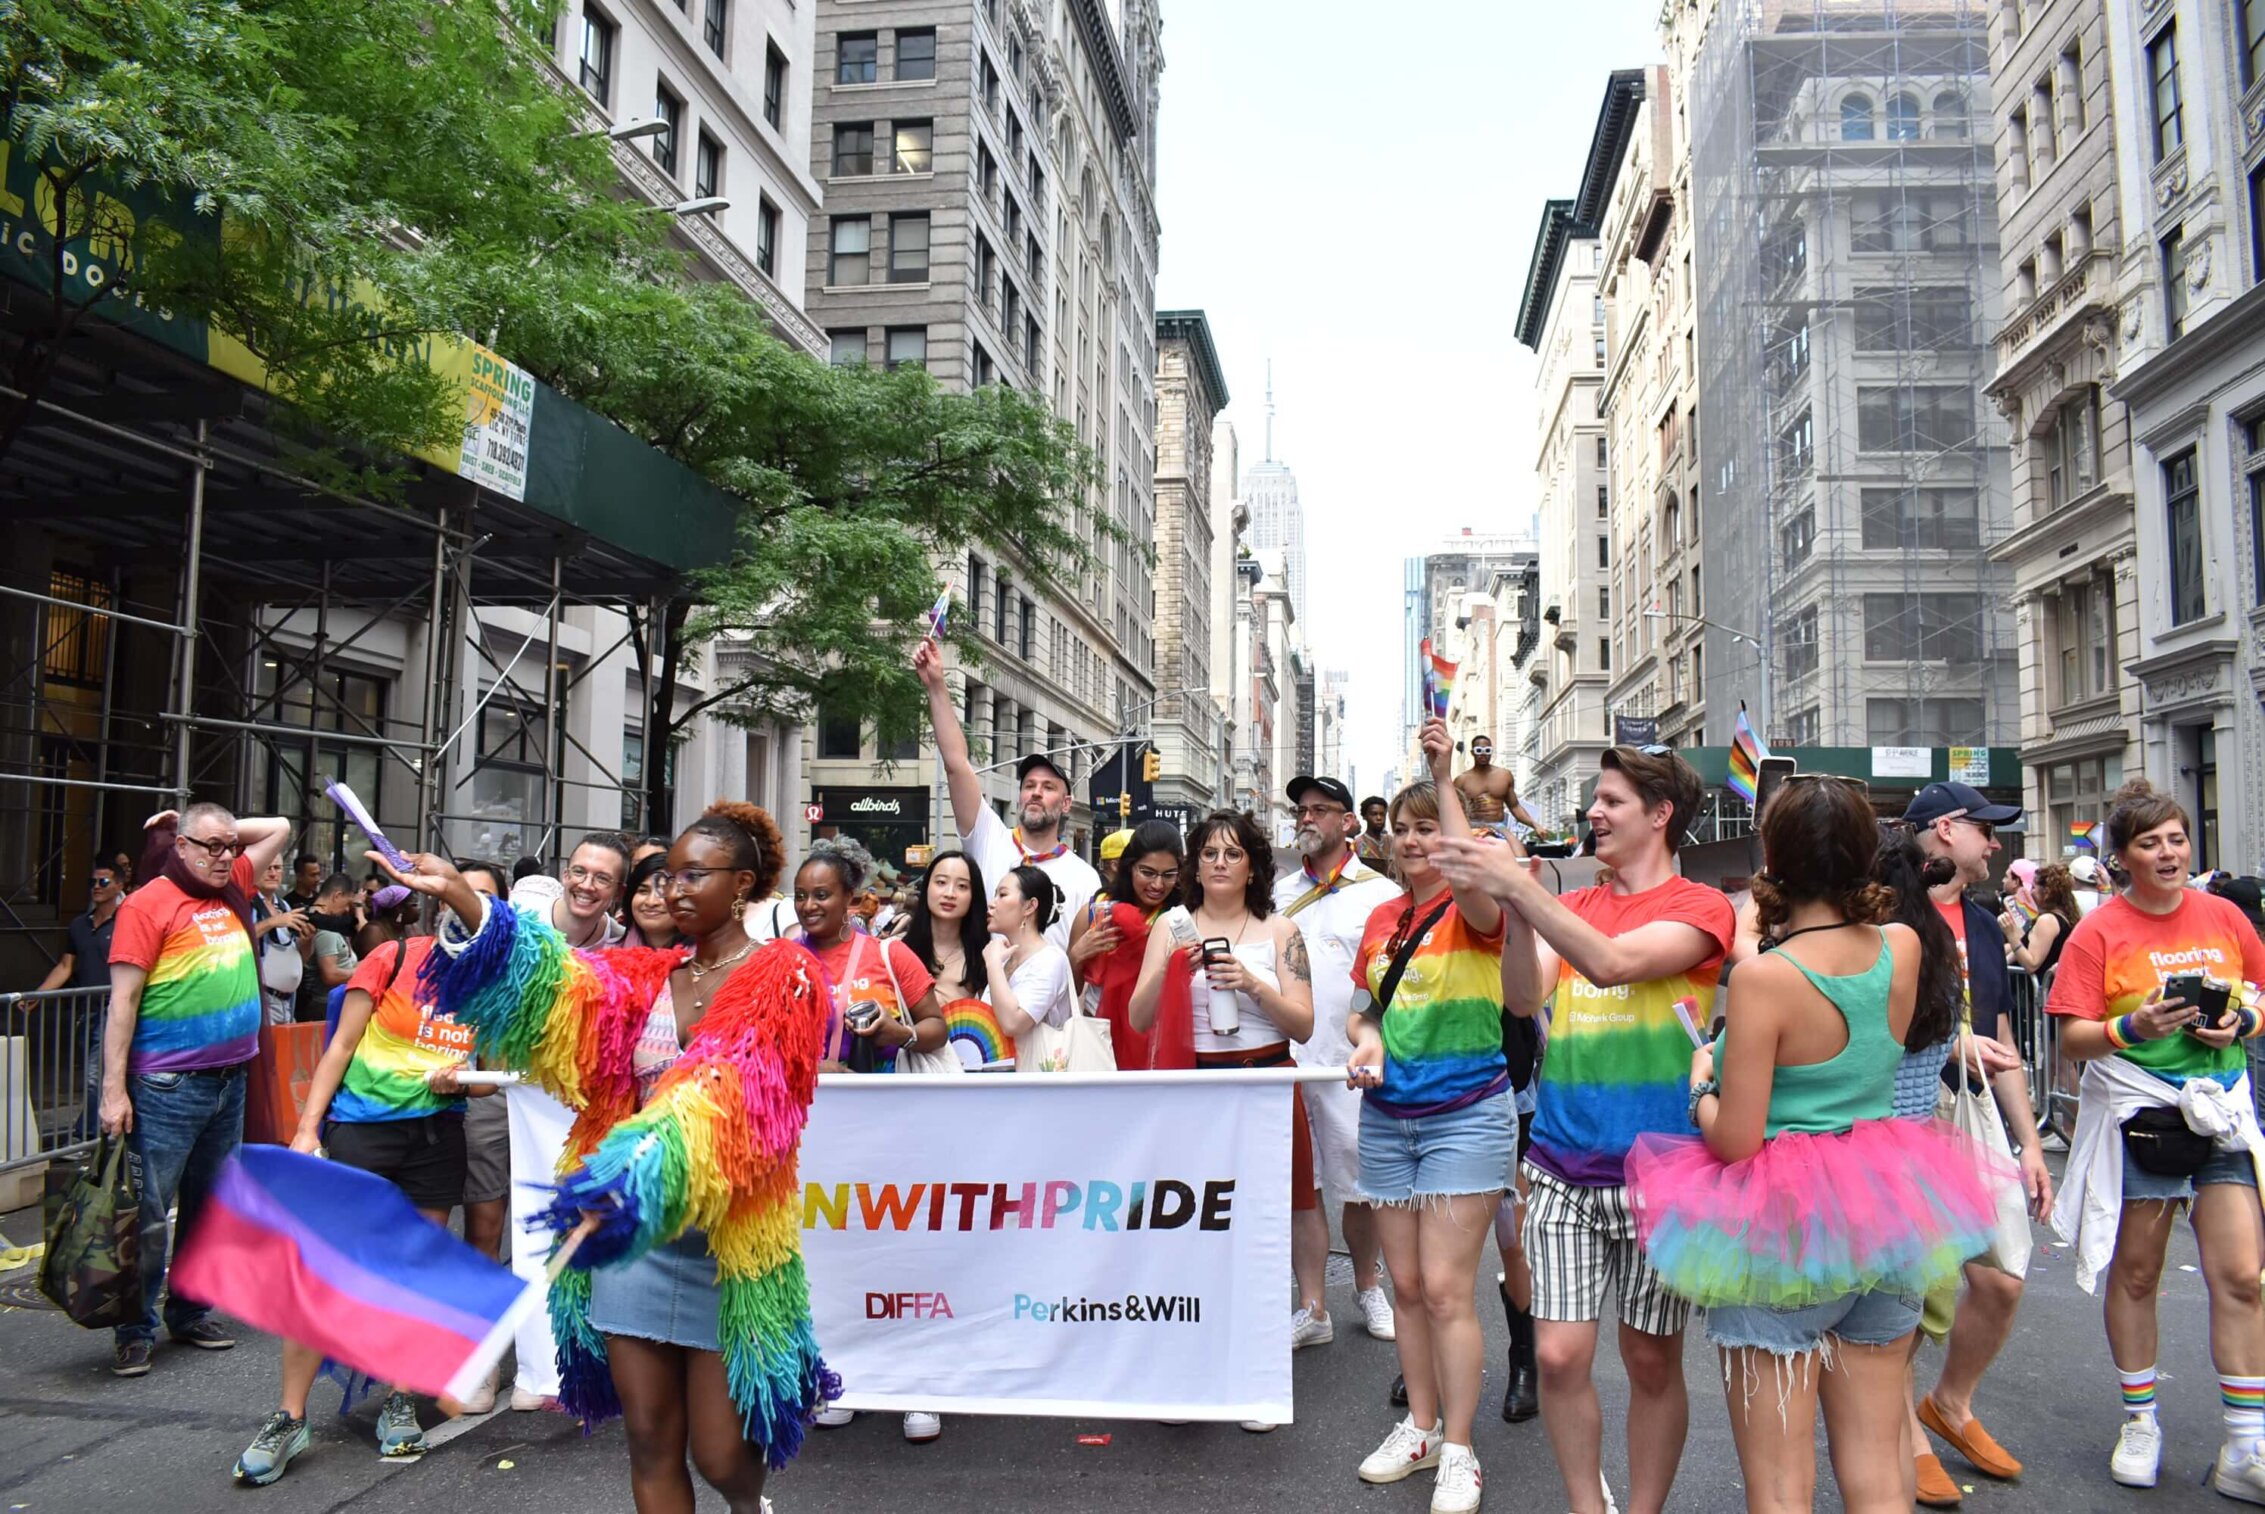 Perkins&Will's New York City studio, wearing rainbow clothing and holding flags, marches down one of the city's avenues.